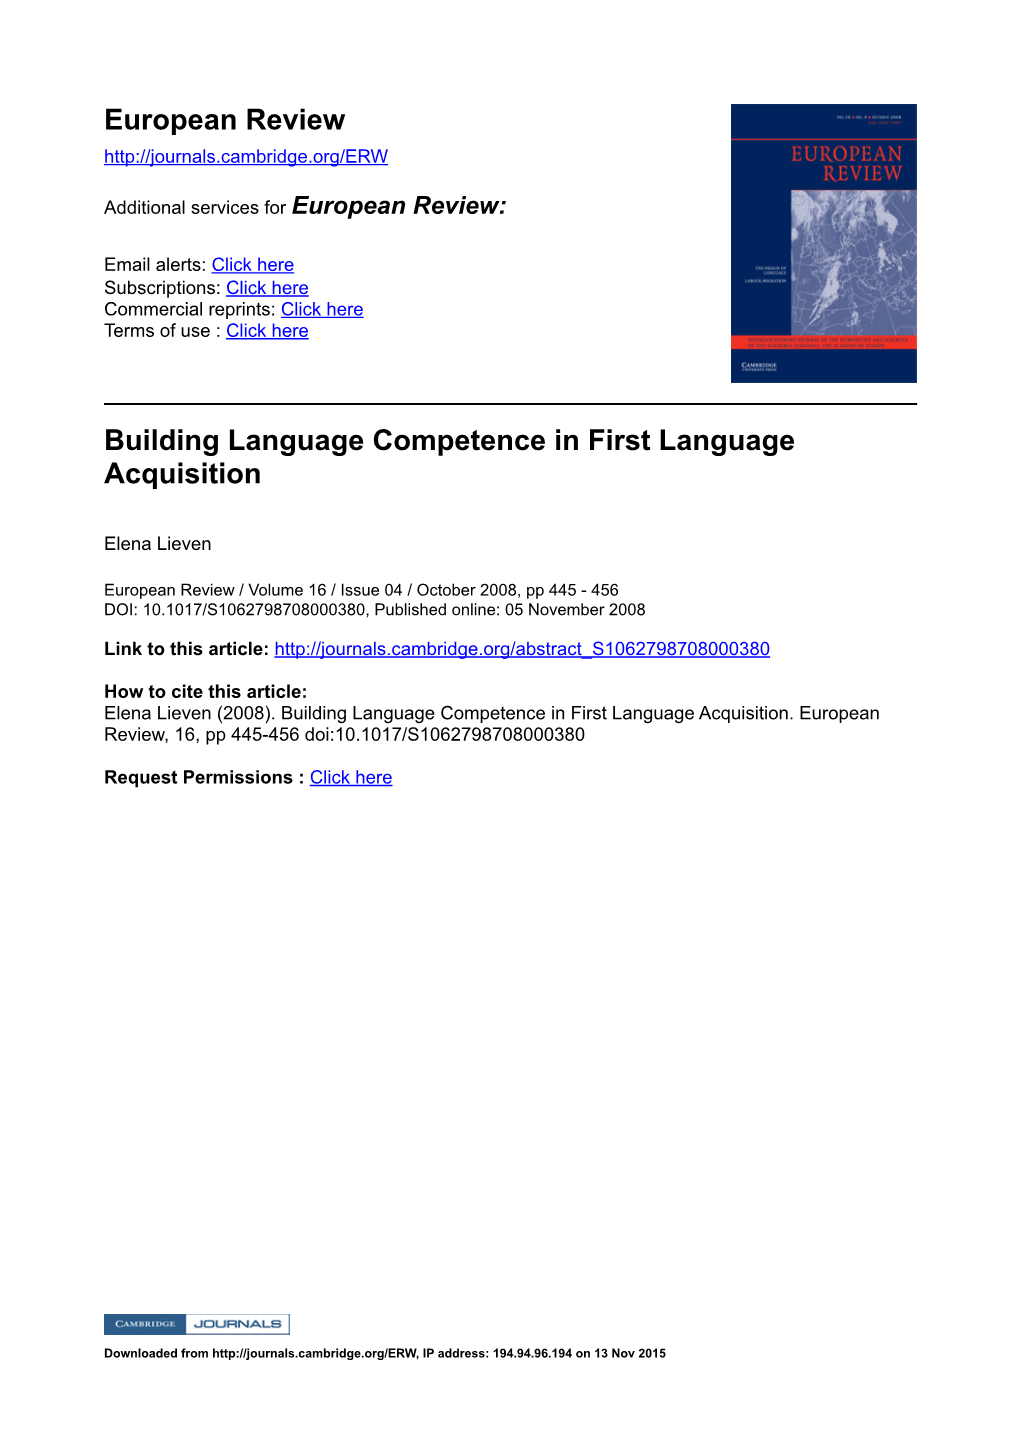 Building Language Competence in First Language Acquisition